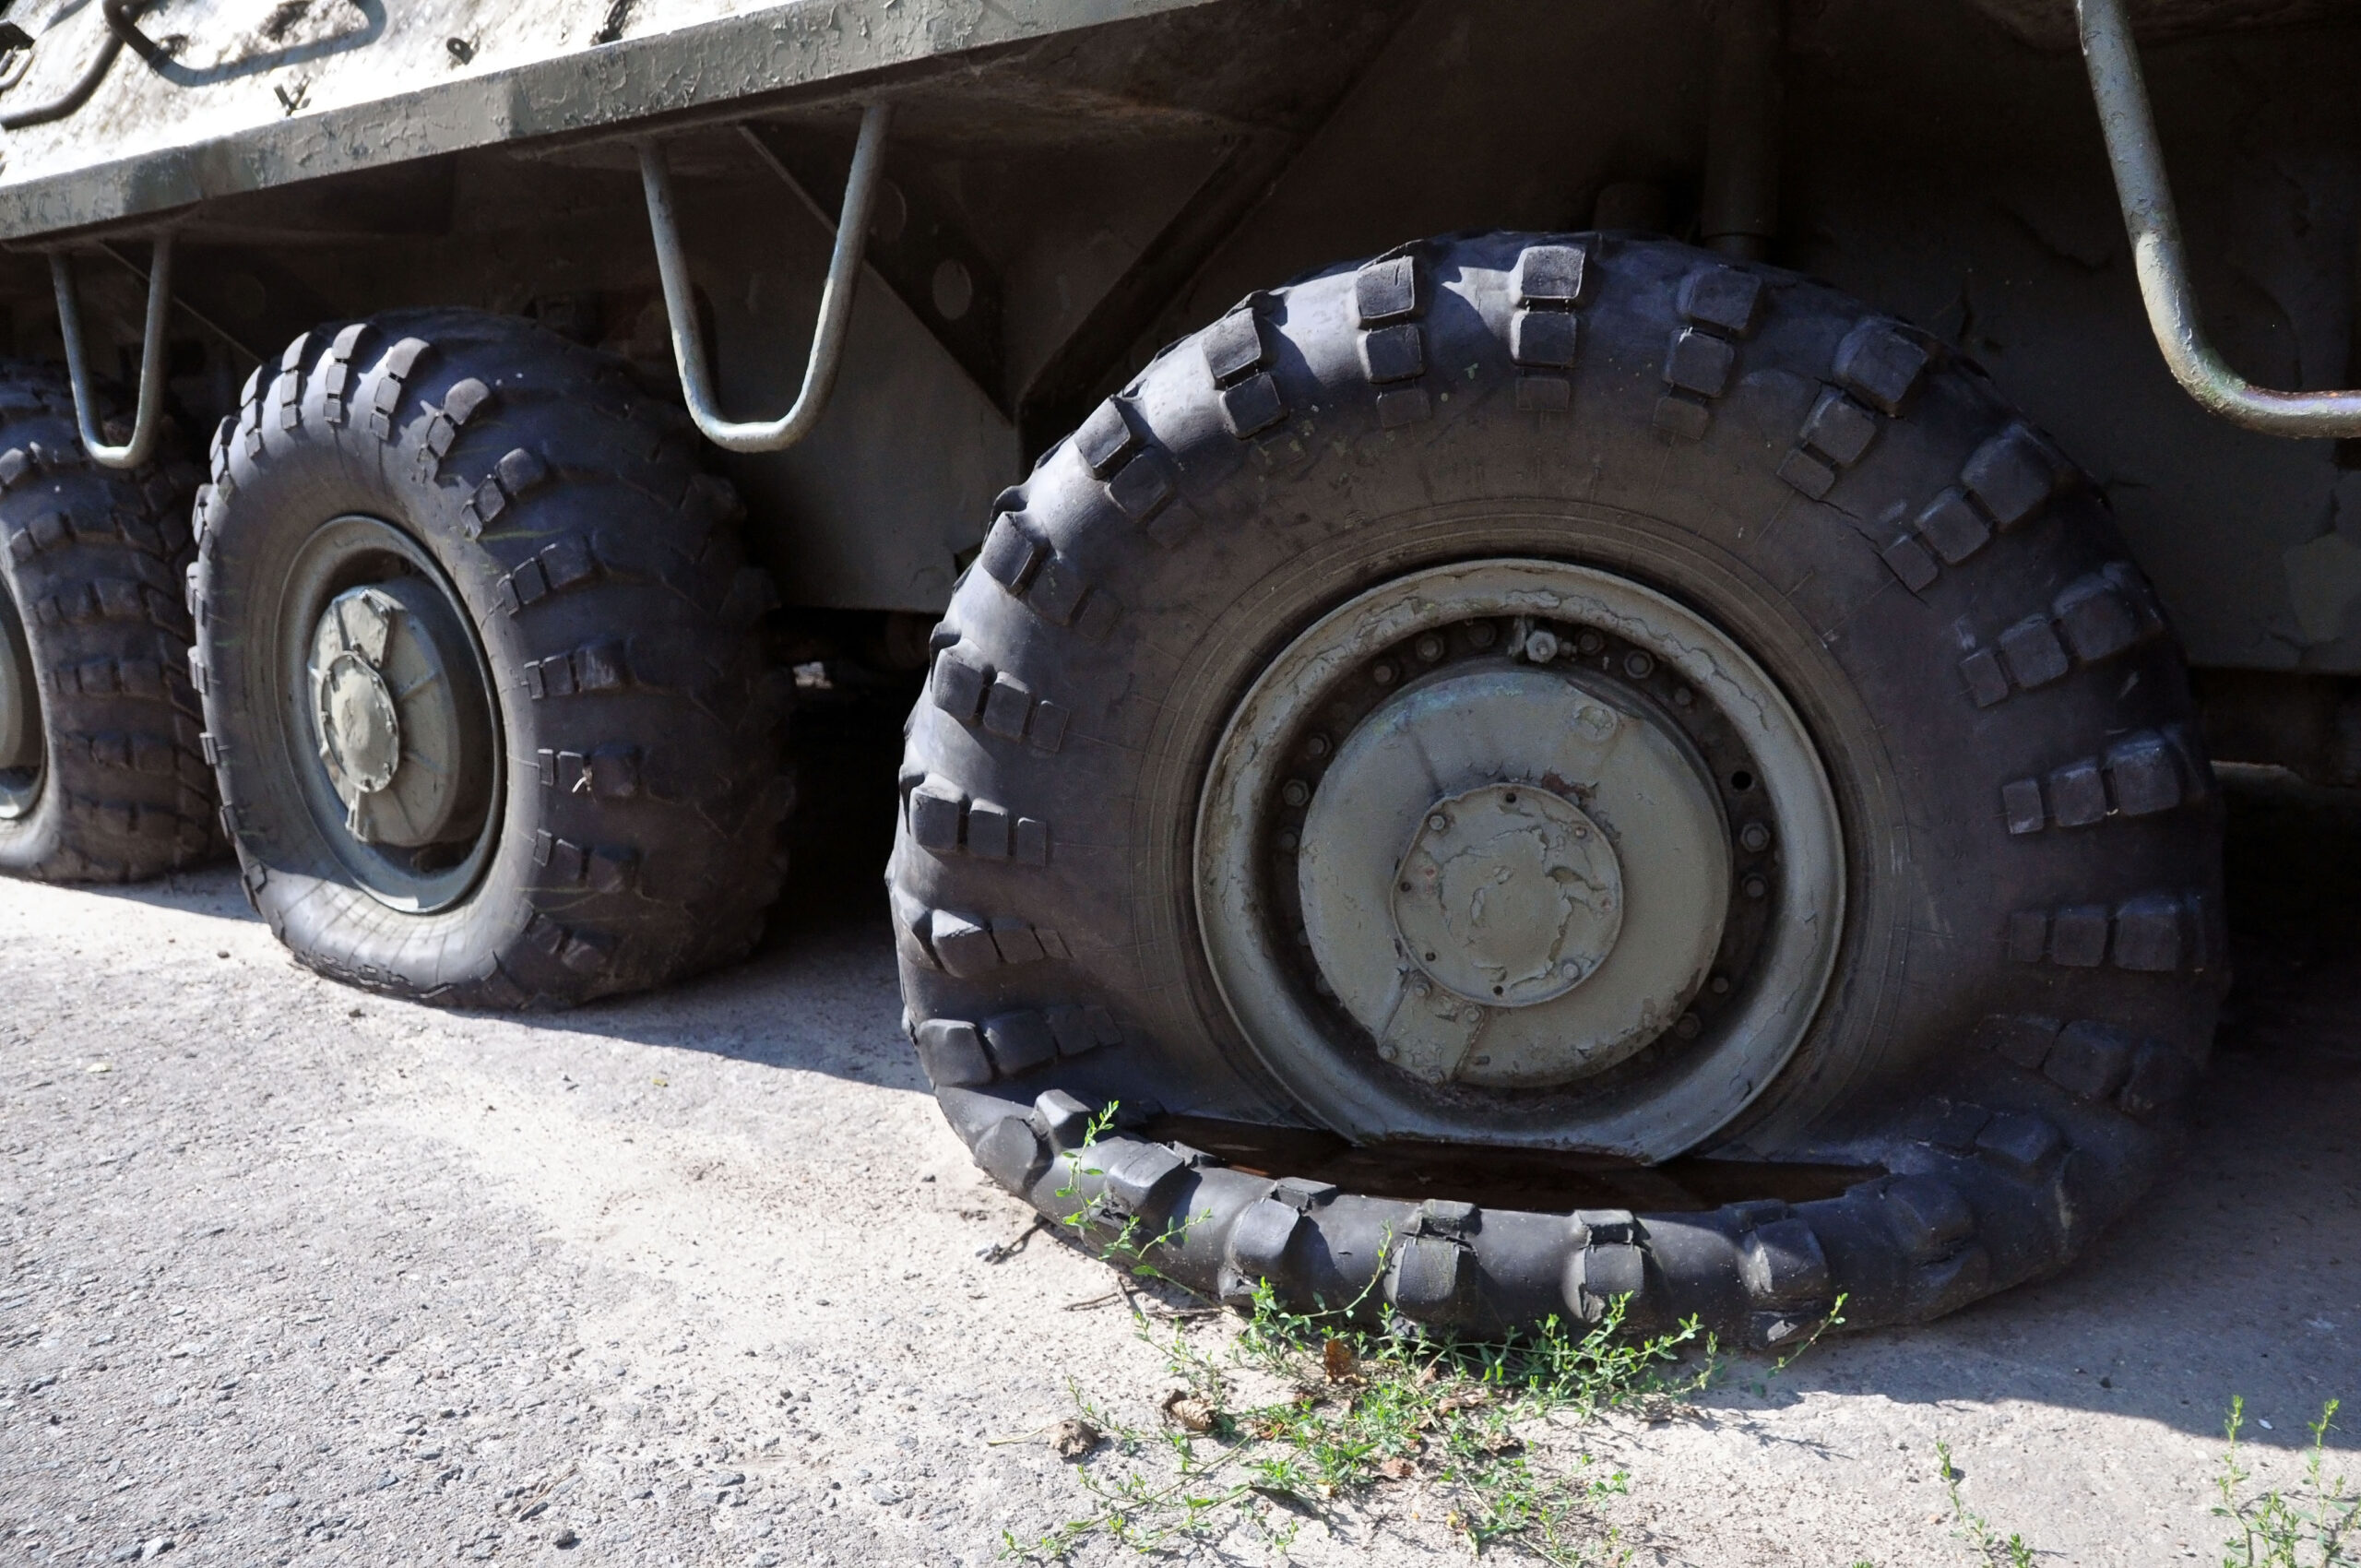 Flat tire on military truck using chinese tires